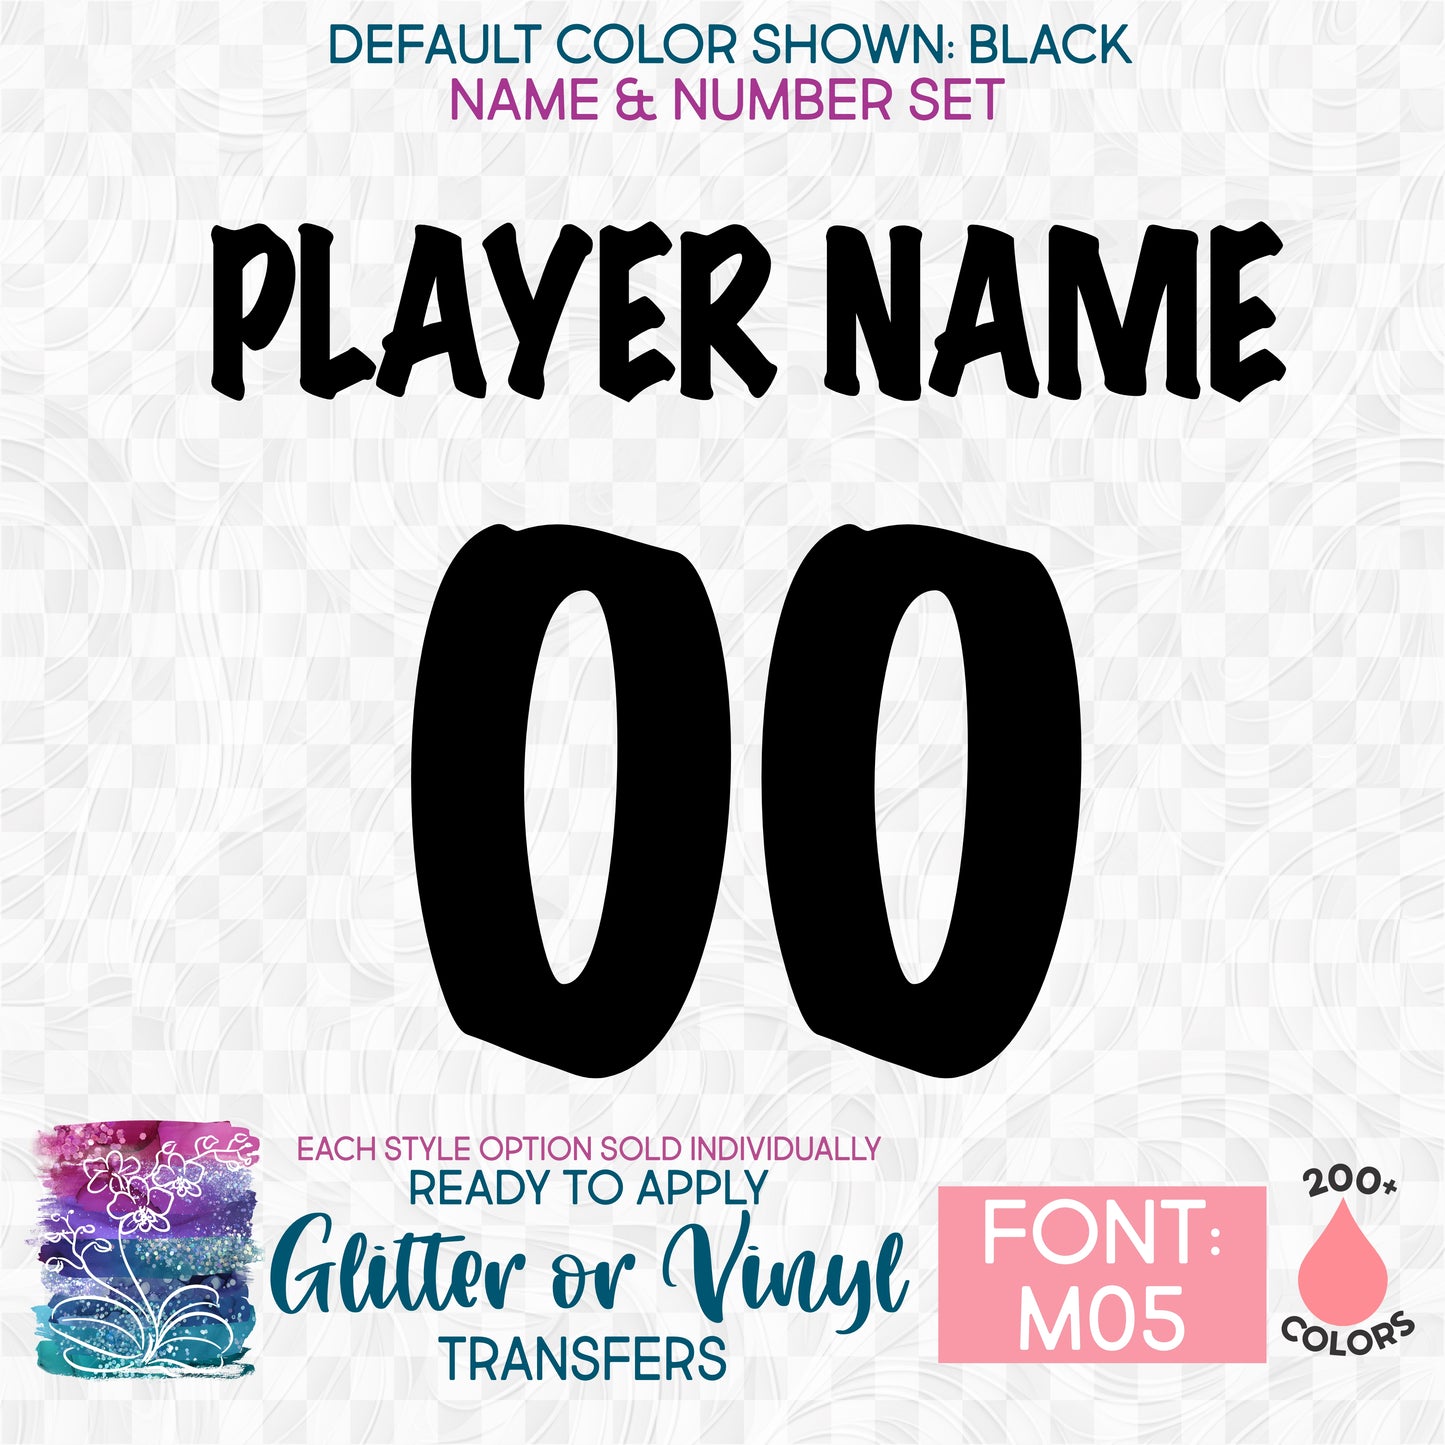 (s097-M05) Custom Player Perfect Name & Number Glitter or Vinyl Iron-On Transfer